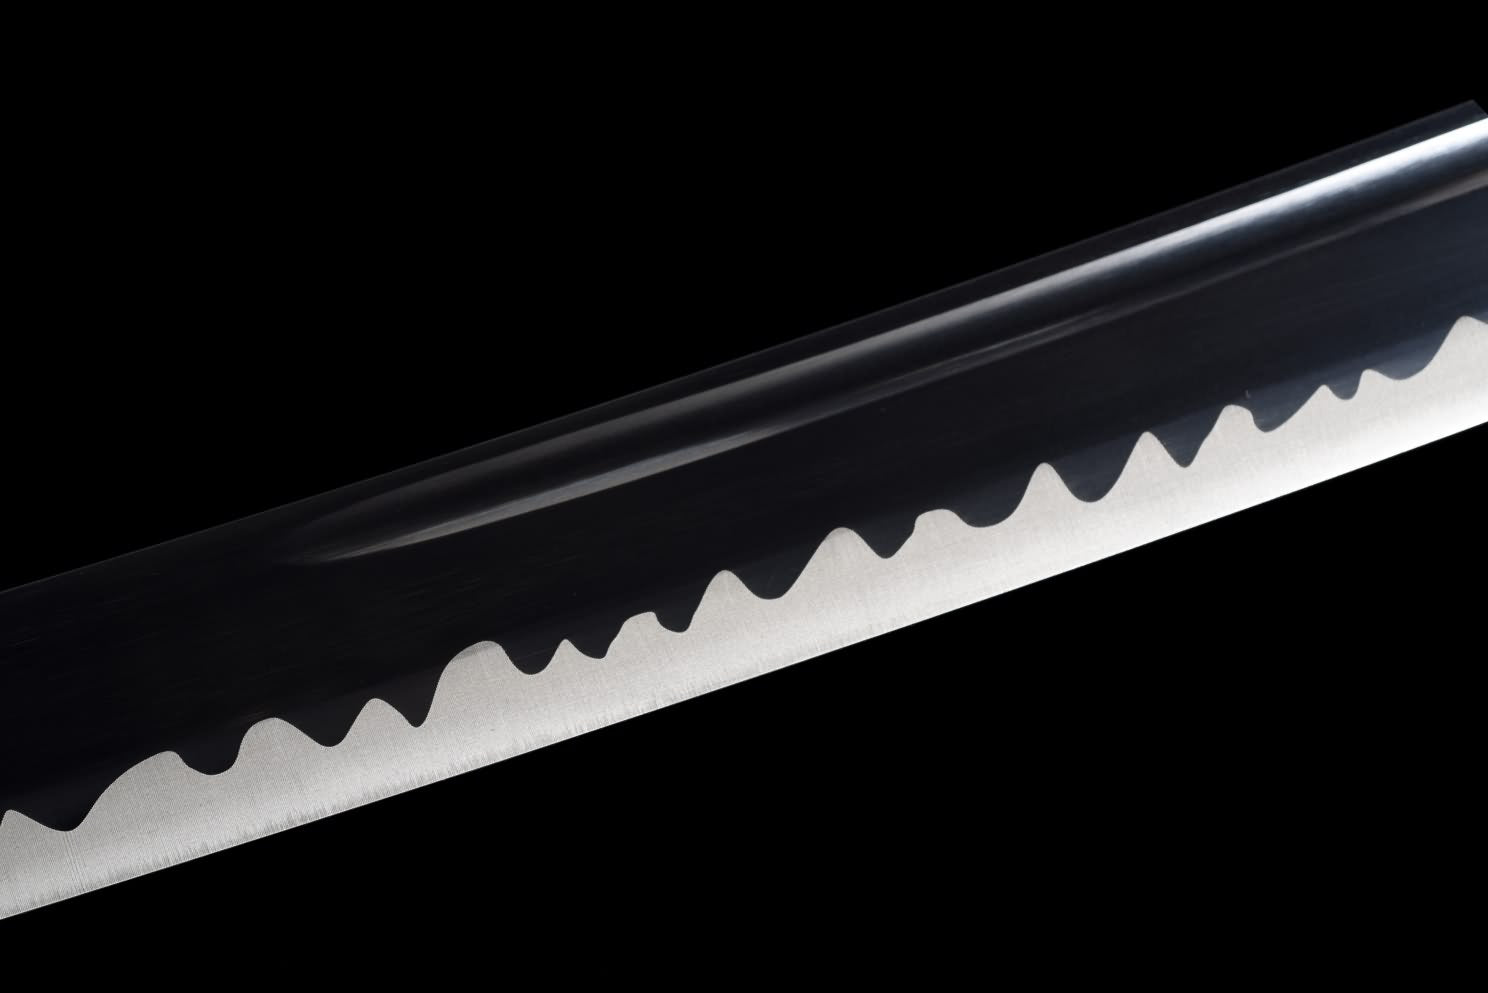 Kangxi dao swords-Hand Forged High Carbon Steel Blade Blade with Alloy Fittings